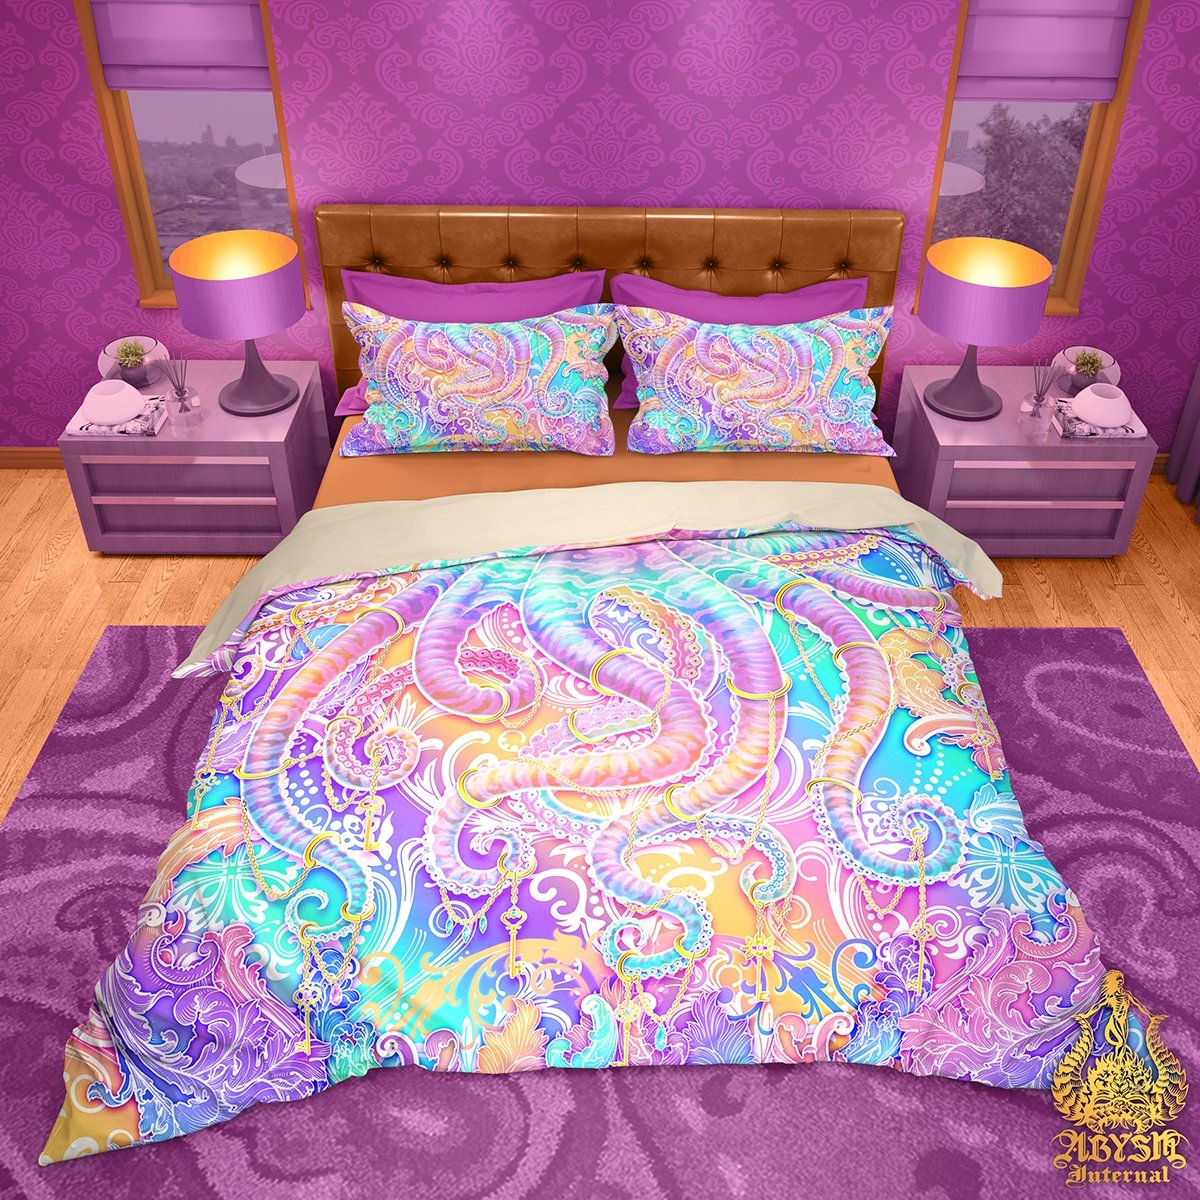 https://cdn.shopify.com/s/files/1/0584/5608/0574/products/pastel-bedding-set-comforter-and-duvet-aesthetic-bed-cover-kawaii-gamer-bedroom-decor-king-queen-and-twin-size-kawaii-octopus-fairy-kei-abysm-internal-628782.jpg?v=1686693419